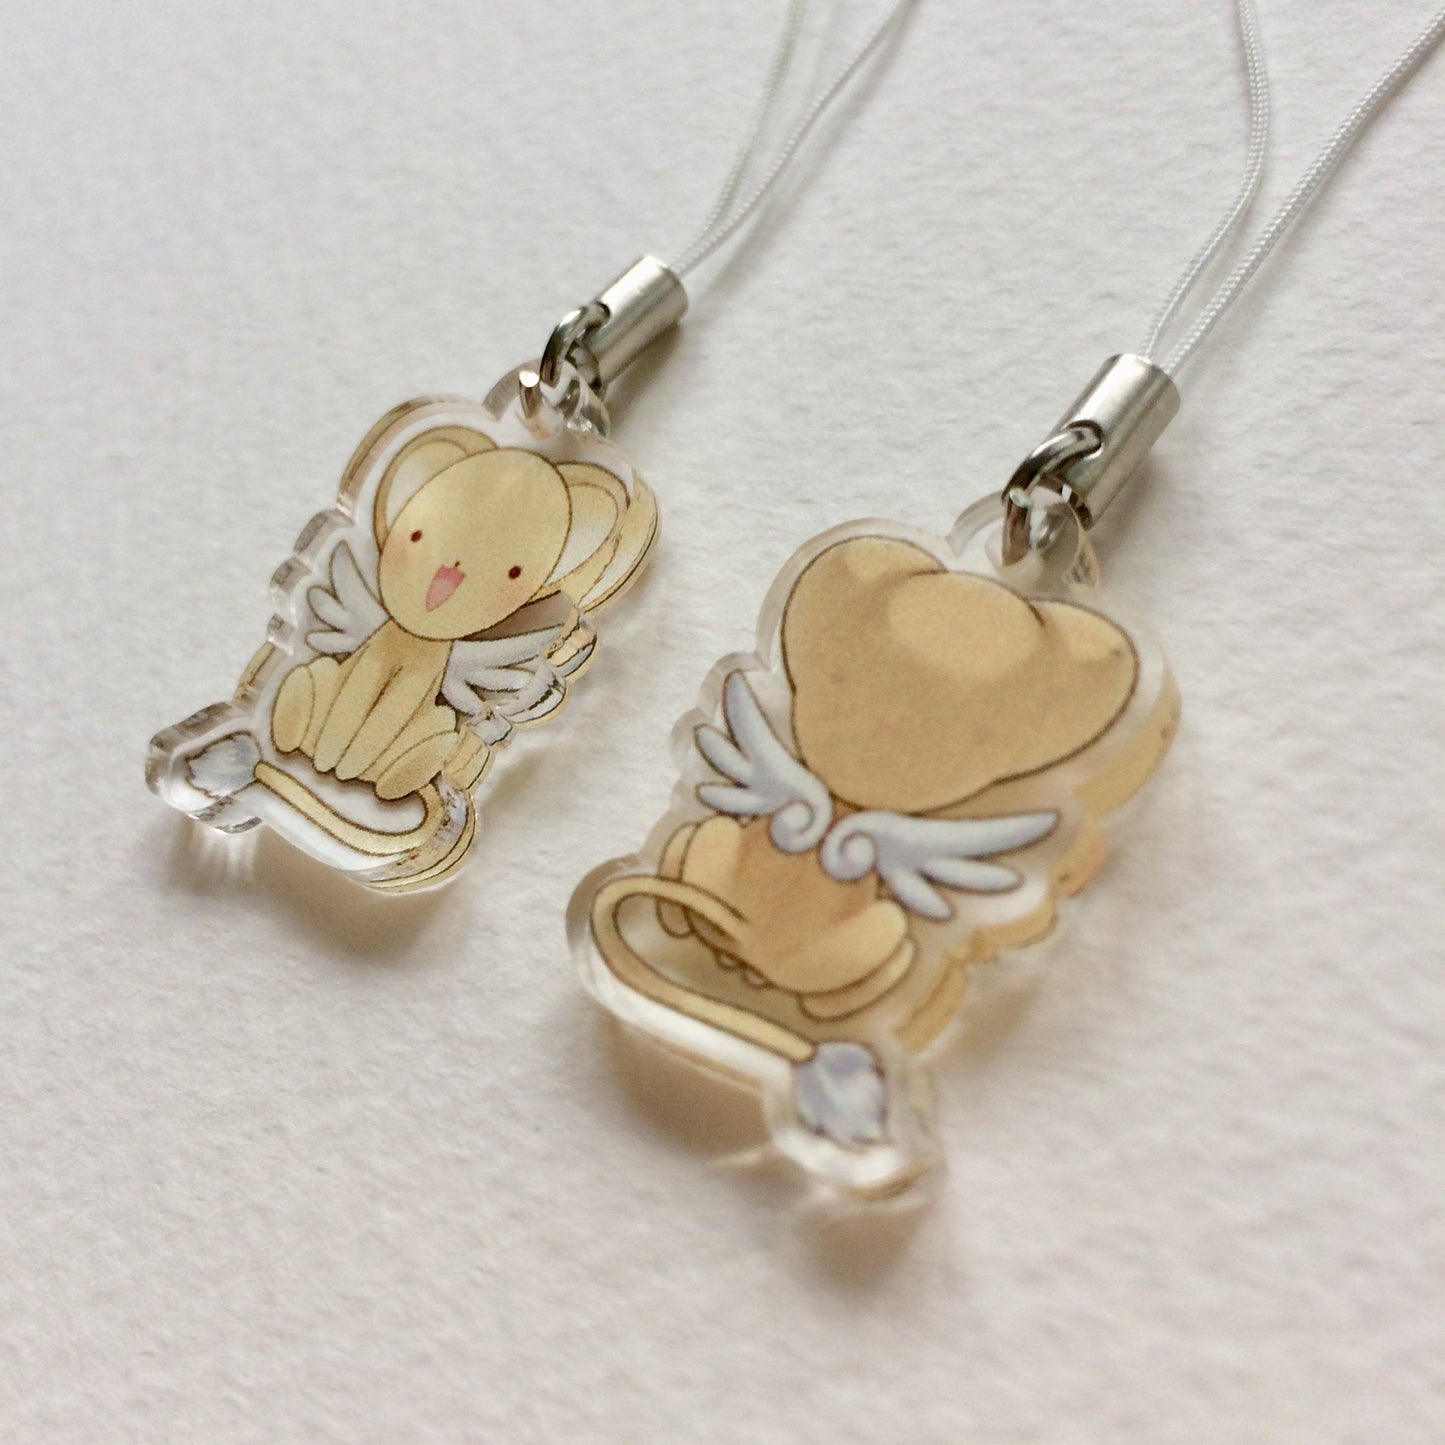 Kero Double-Sided Clear Acrylic and Epoxy Resin Charm